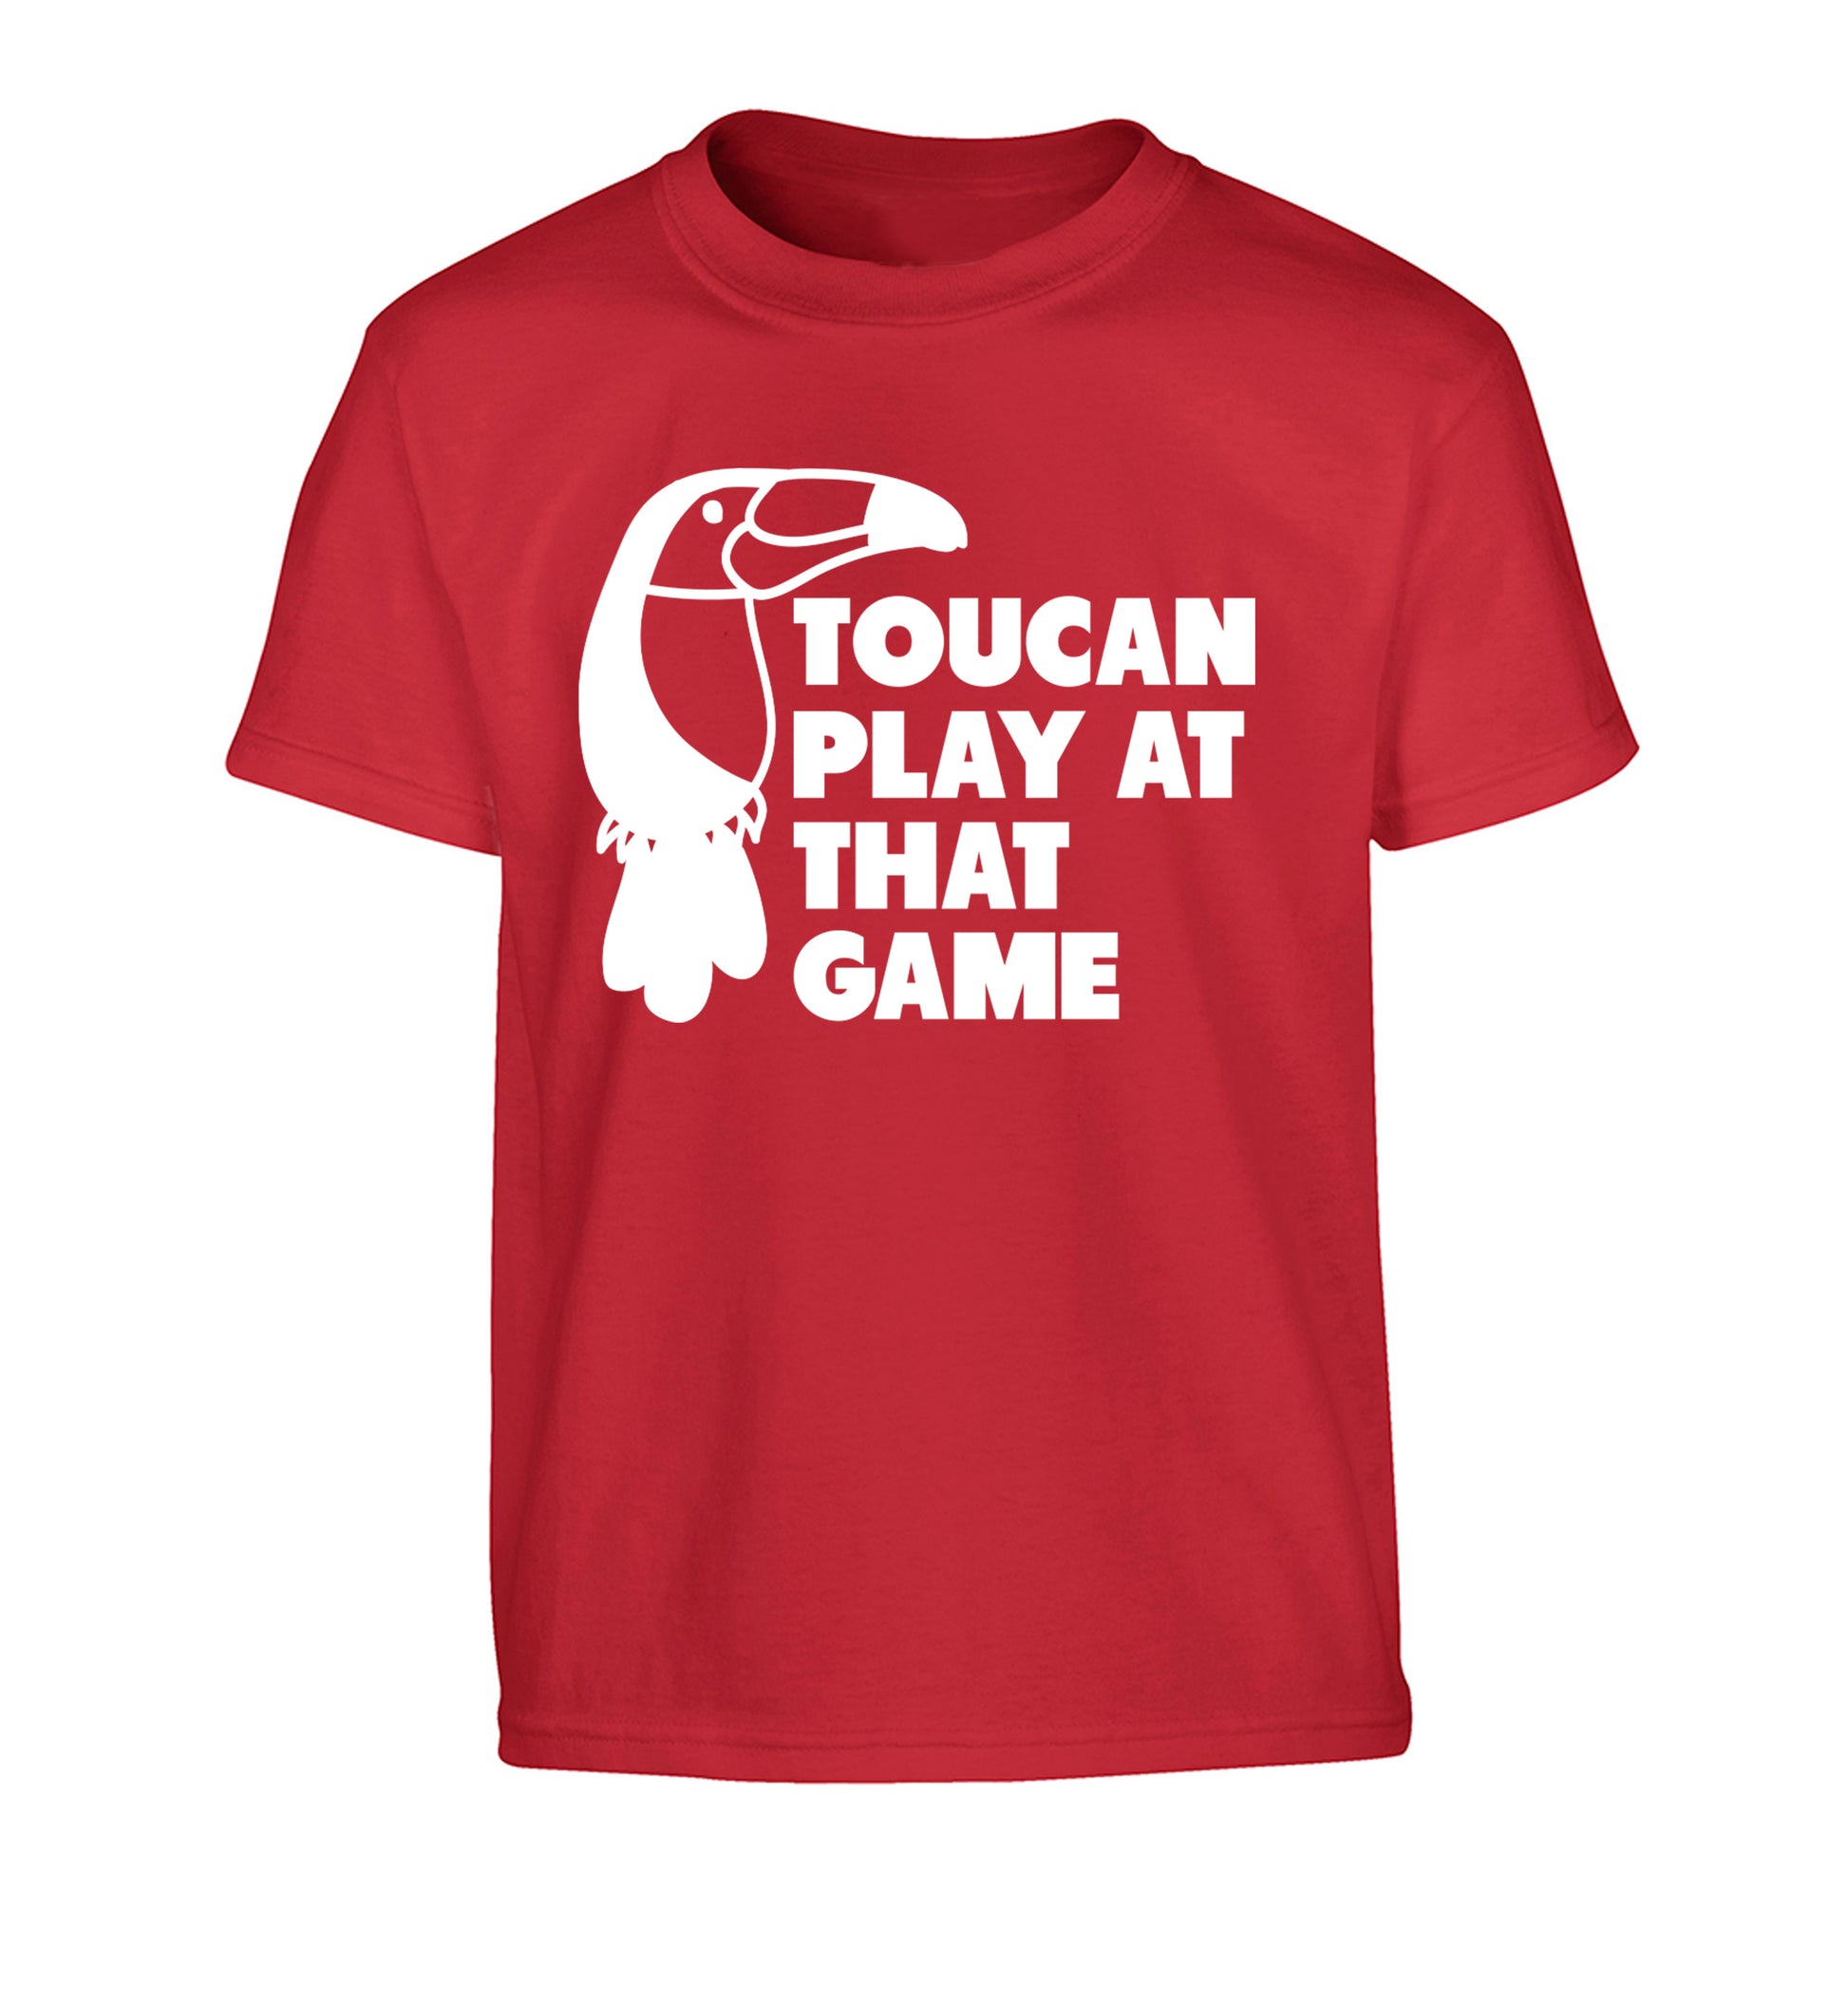 Toucan play at that game Children's red Tshirt 12-13 Years